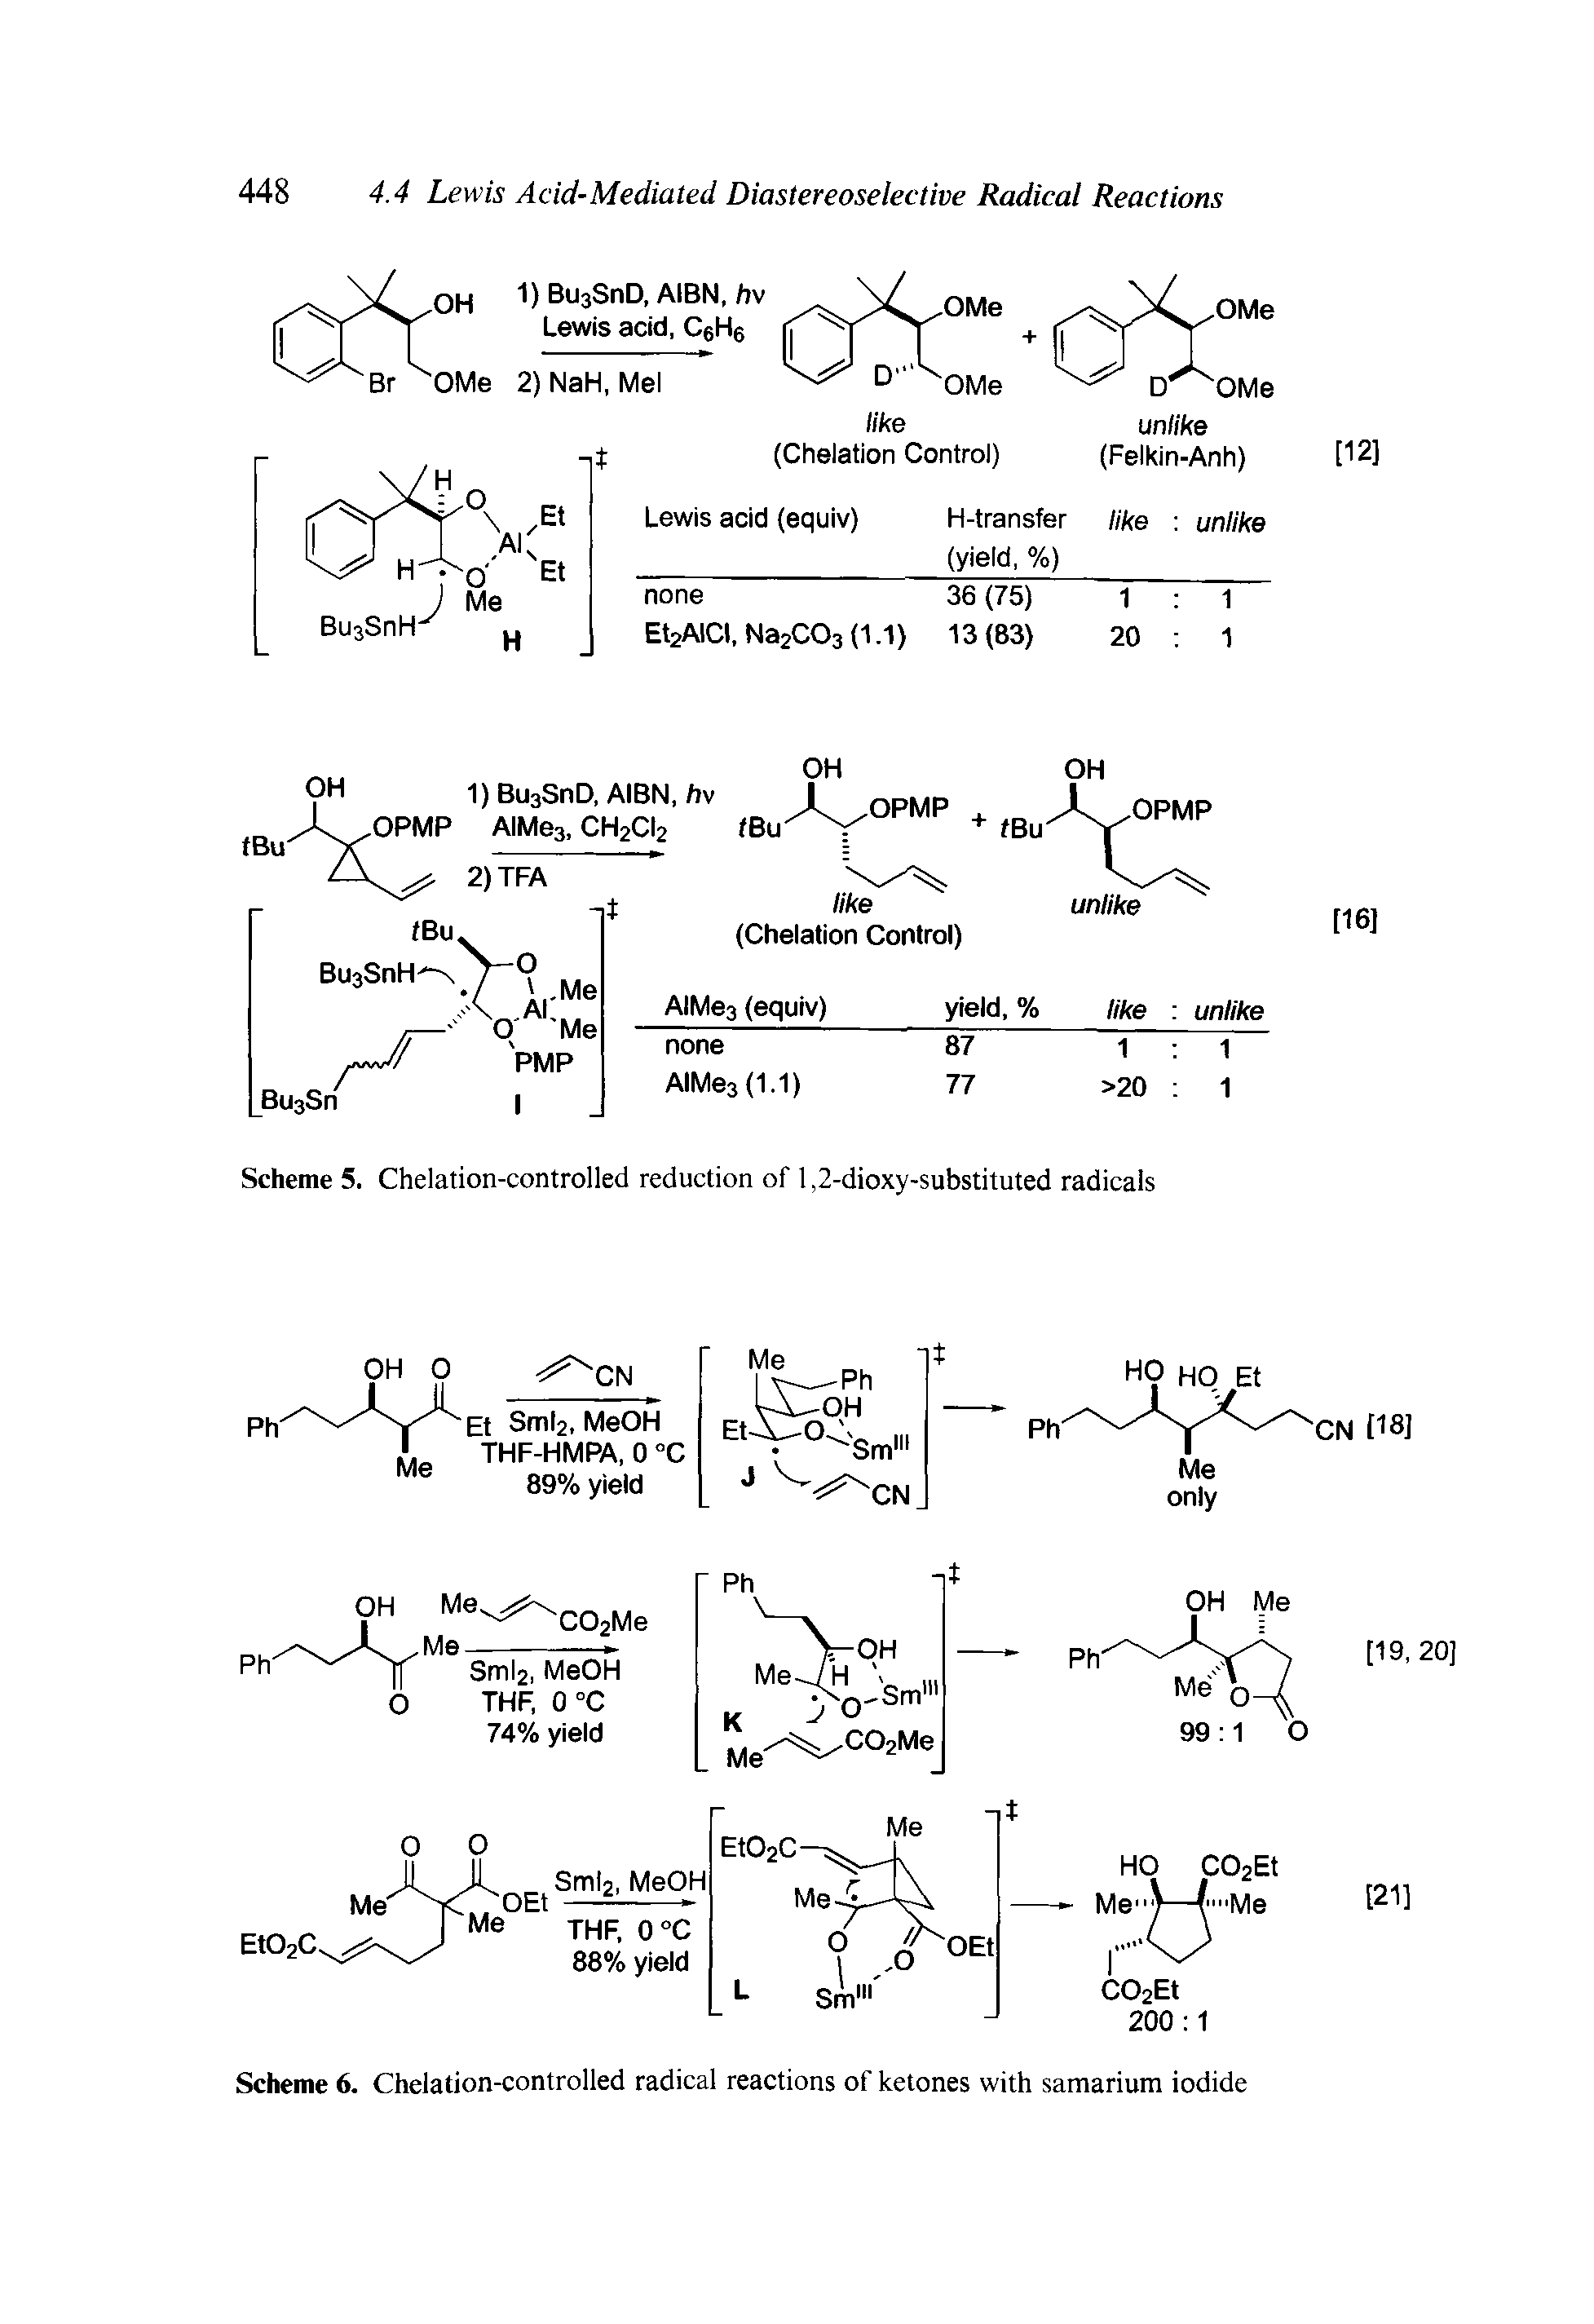 Scheme 5. Chelation-controlled reduction of 1,2-dioxy-substituted radicals...